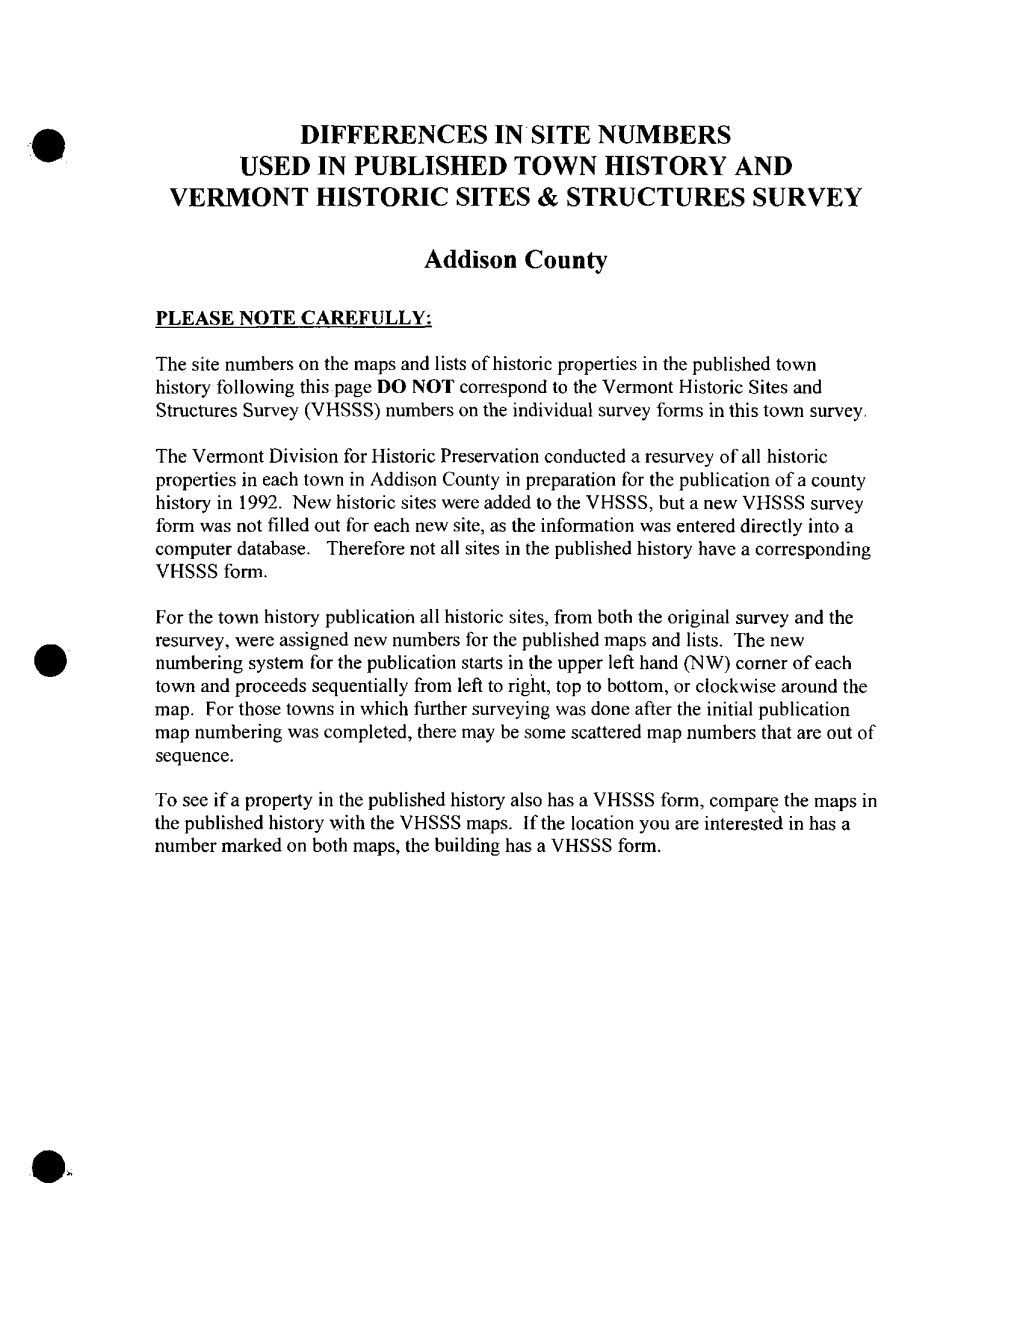 Differences in Site Numbers Used in Published Town History and Vermont Historic Sites & Structures Survey